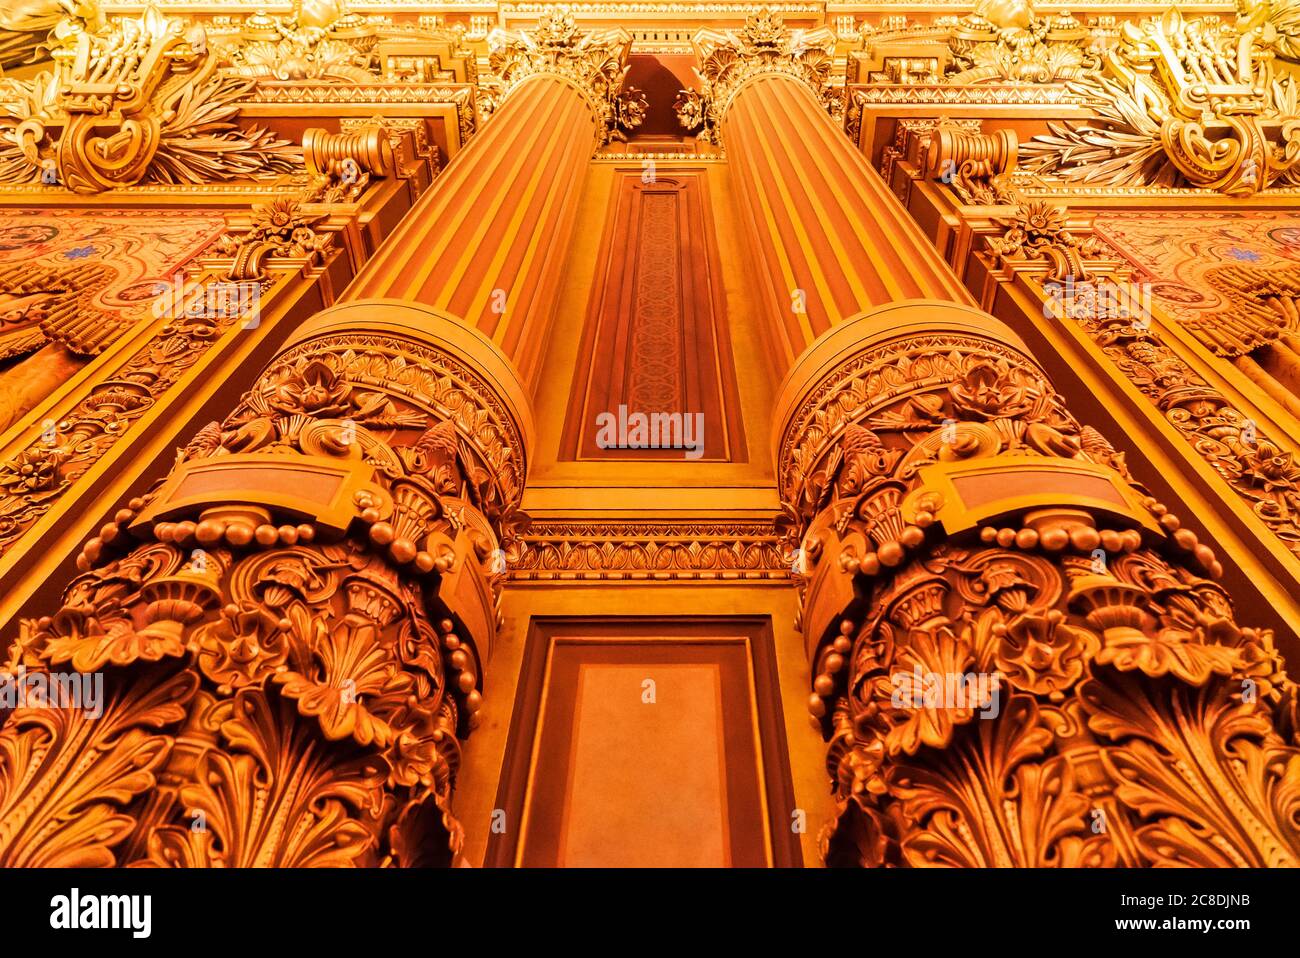 Paris, France - November 14, 2019: Wall and columns of the Opera National de Paris Garnier lobby of the main staircase. View from the floor Stock Photo